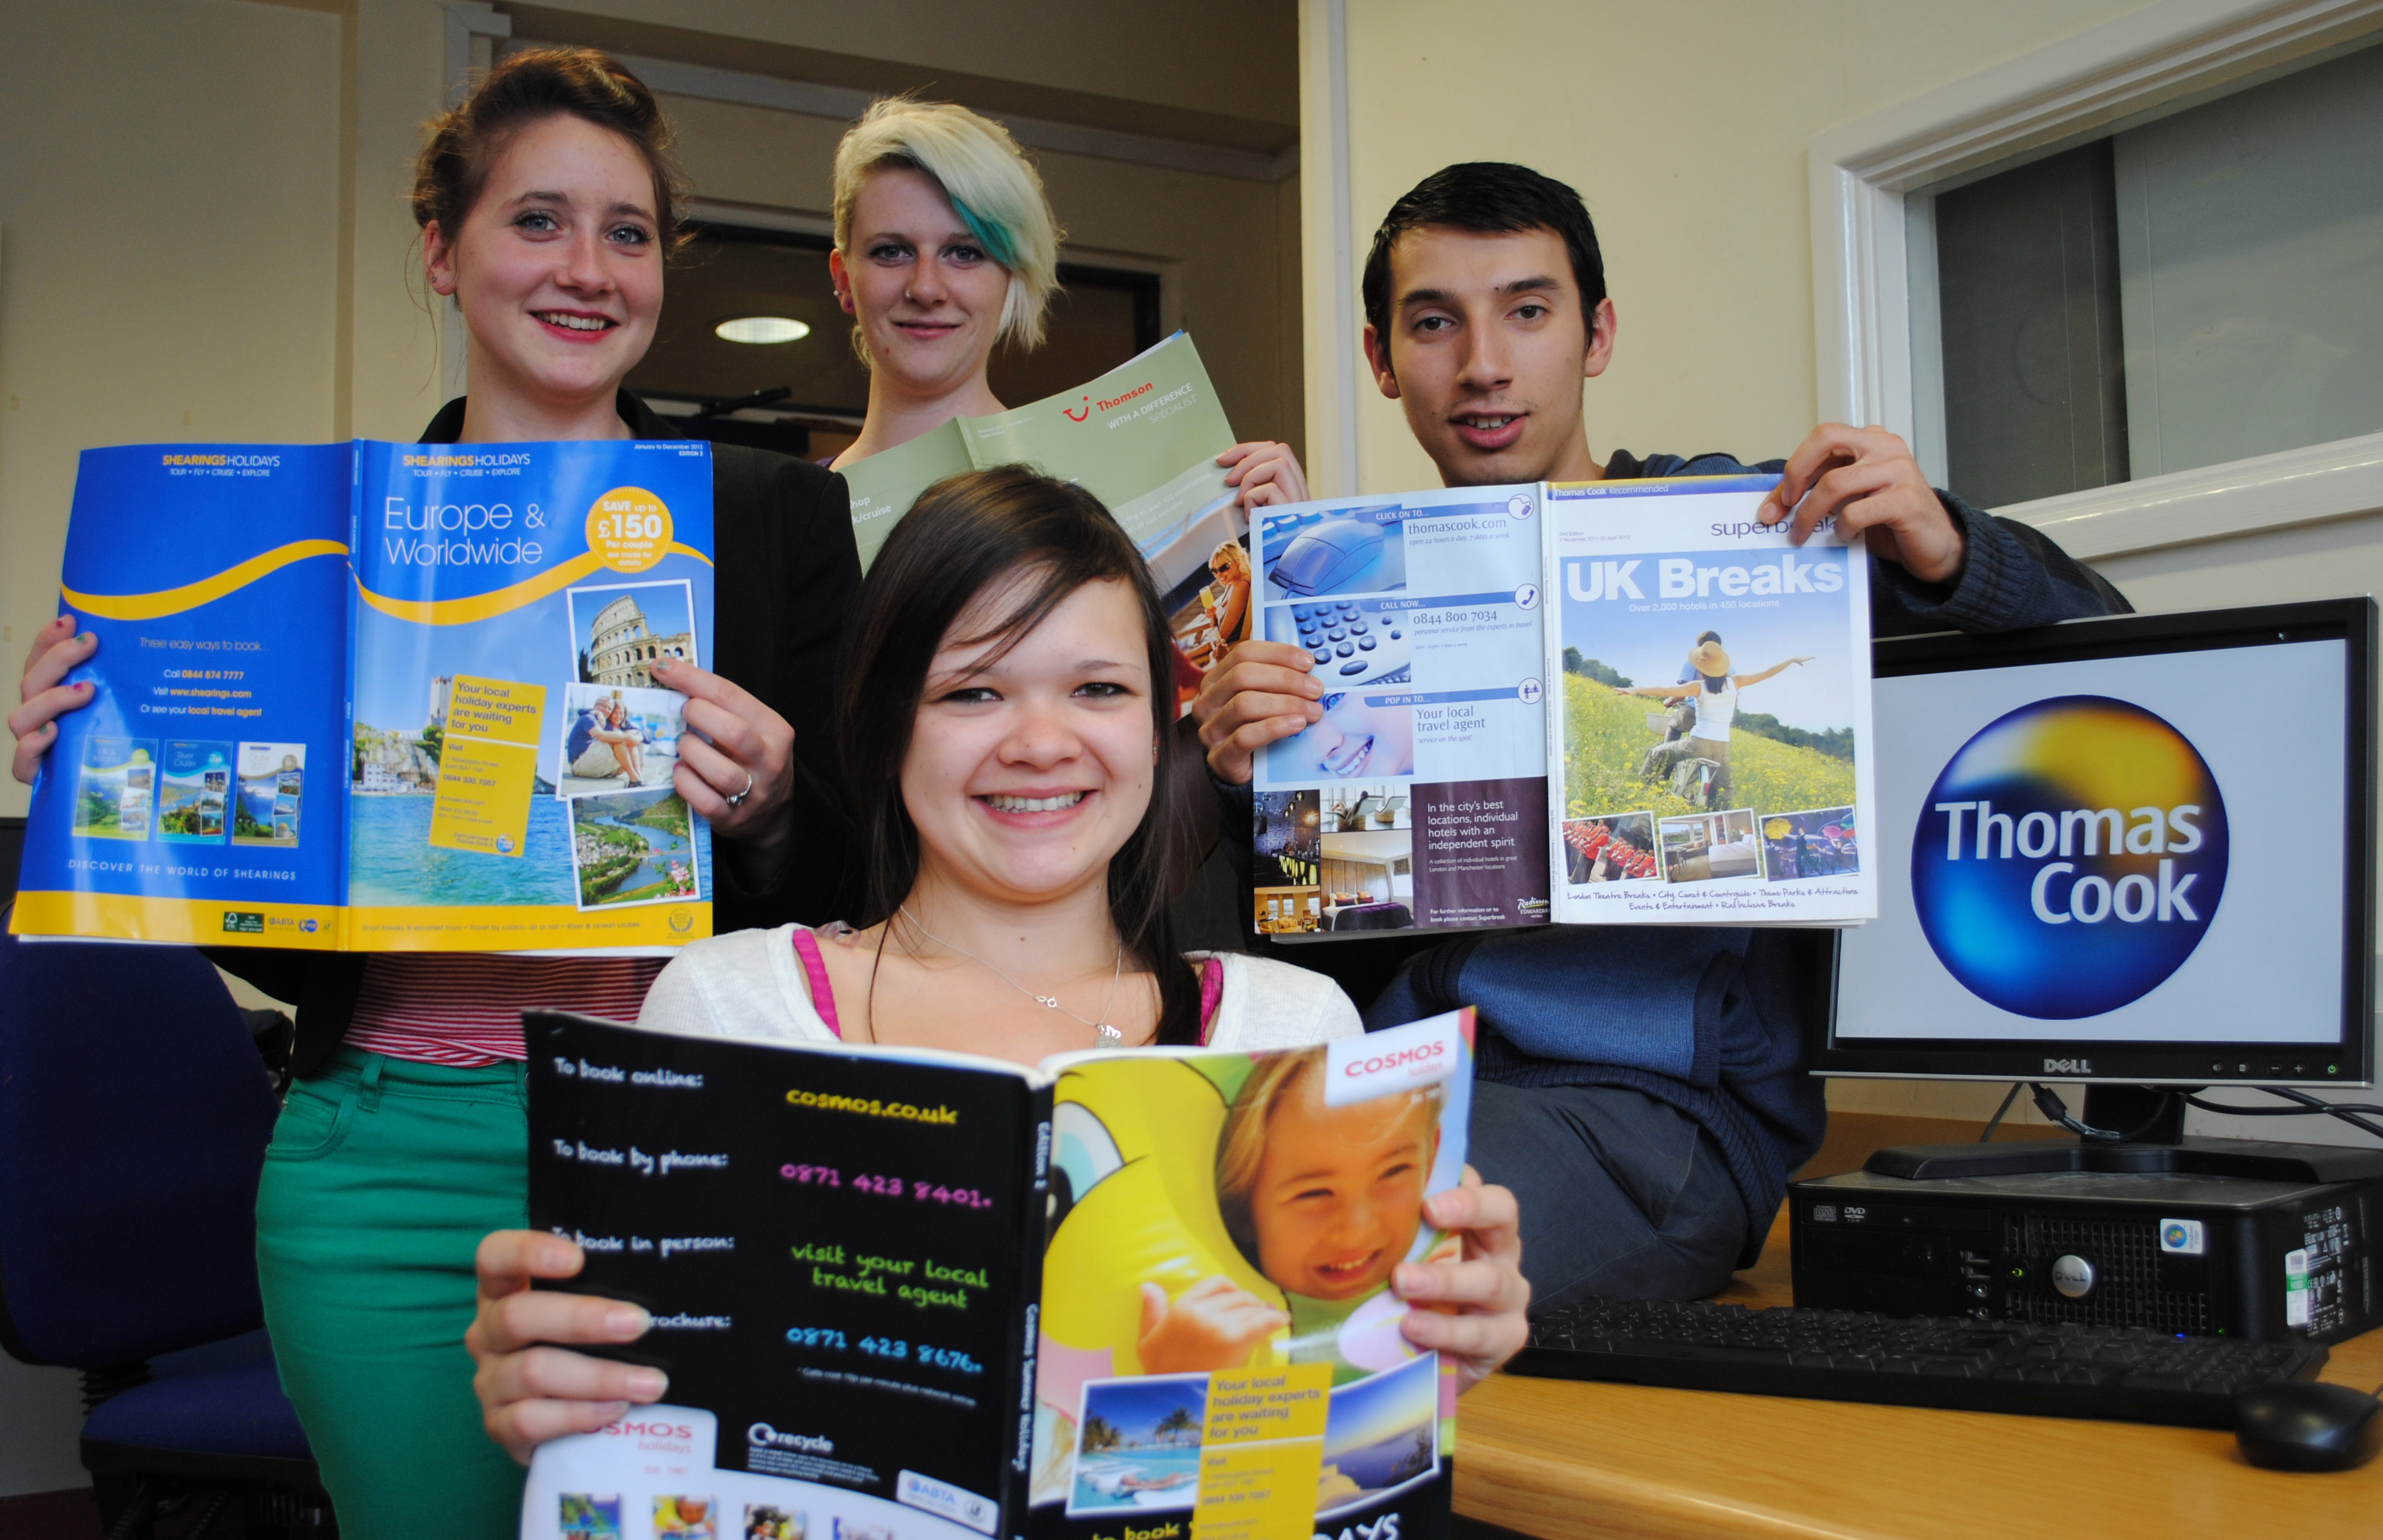 student travel agency oxford